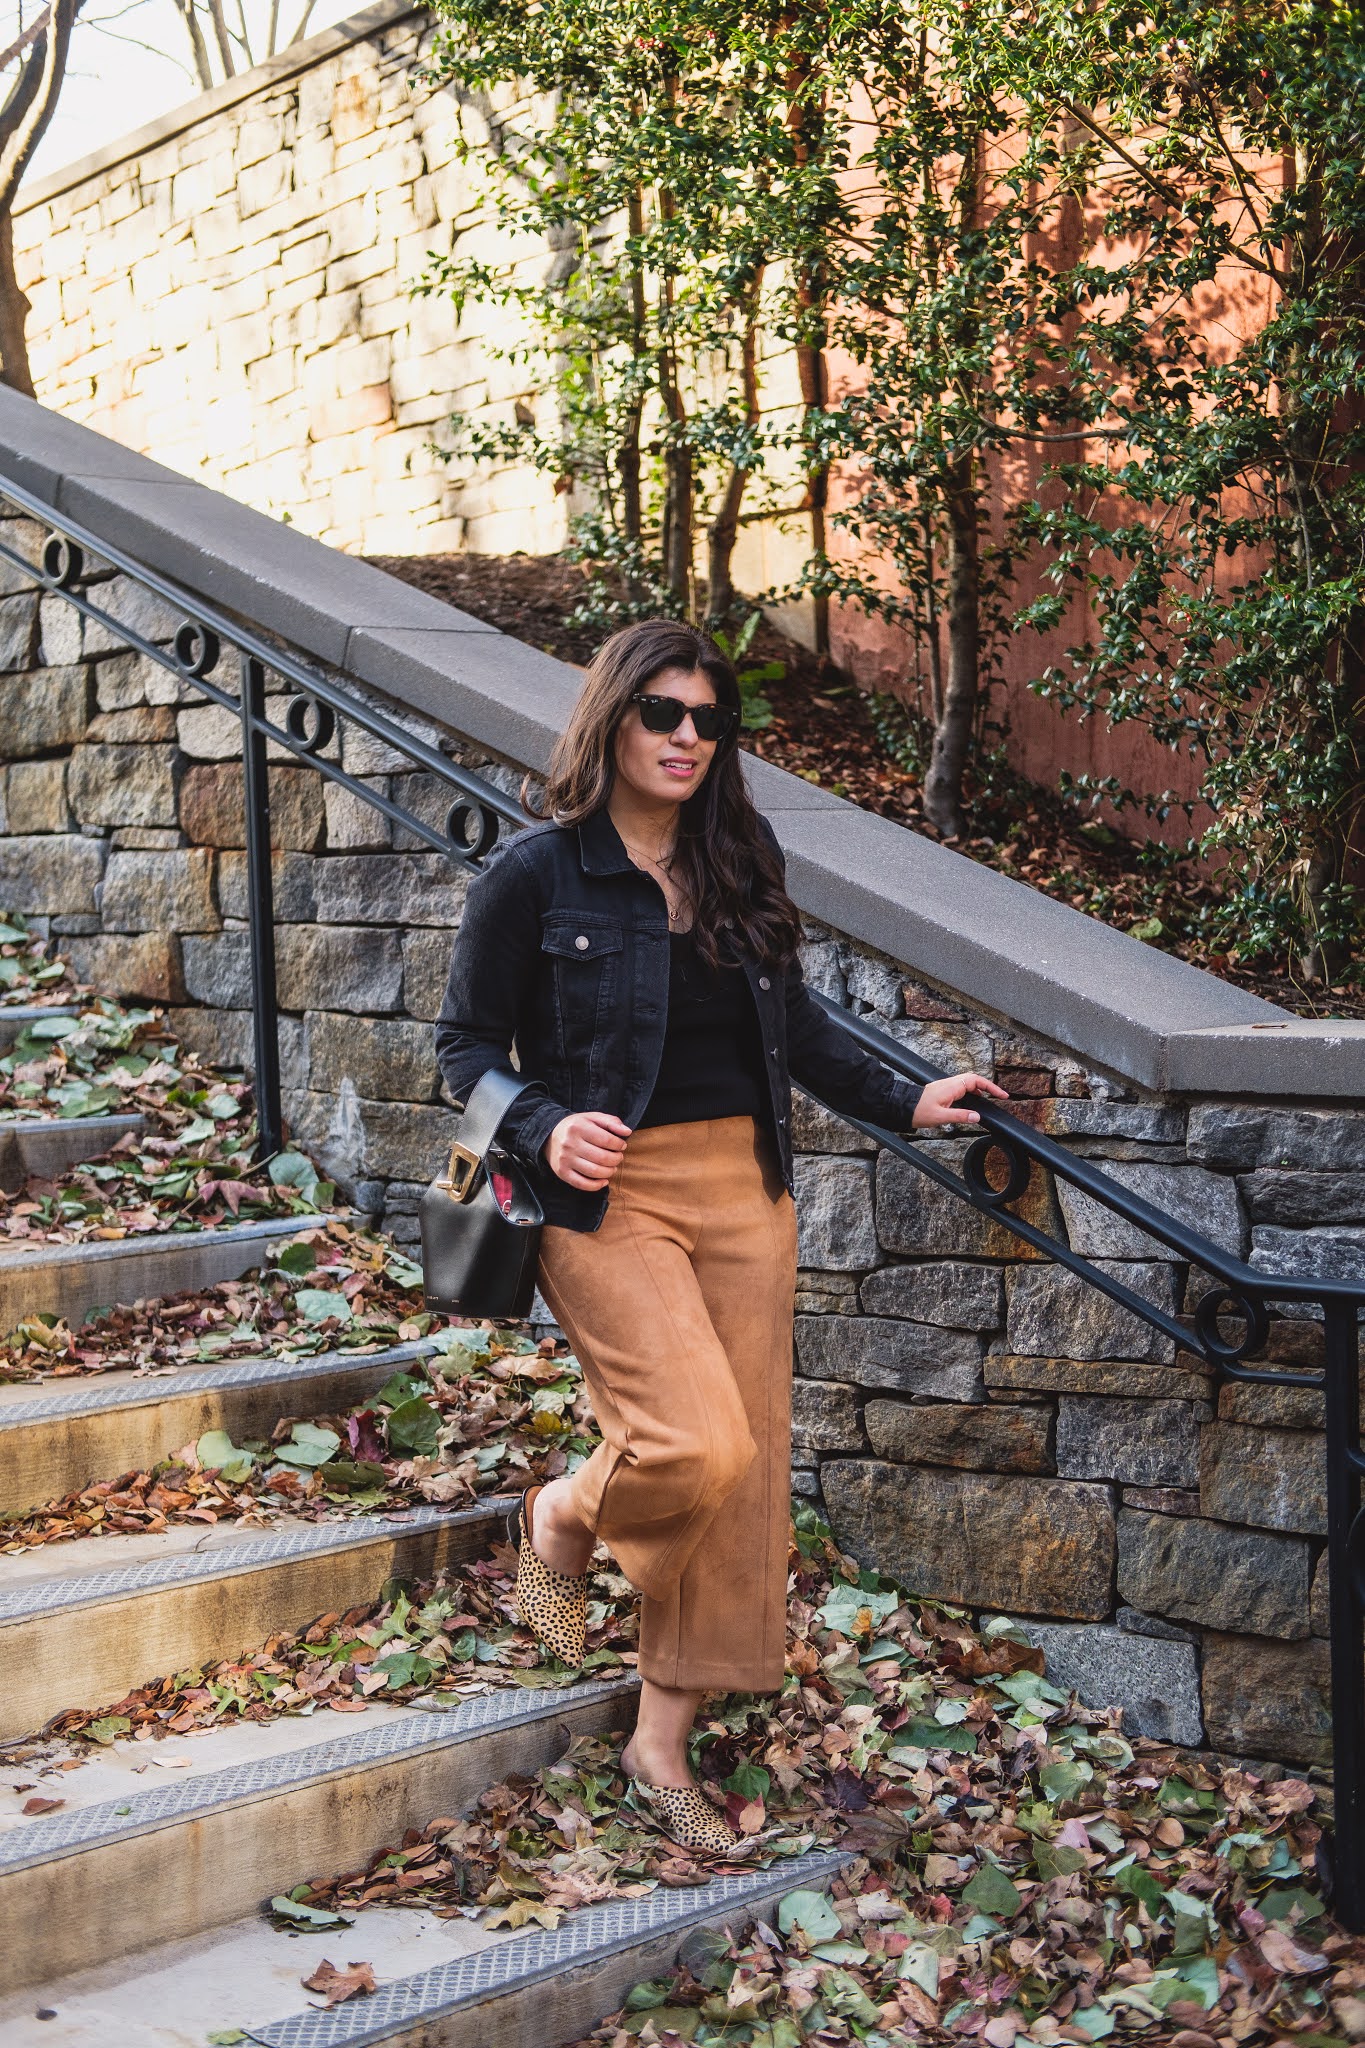 Fabulous in a Flash - Chic on the Cheap  Connecticut based style blogger  on a budget, by Lydia Abate